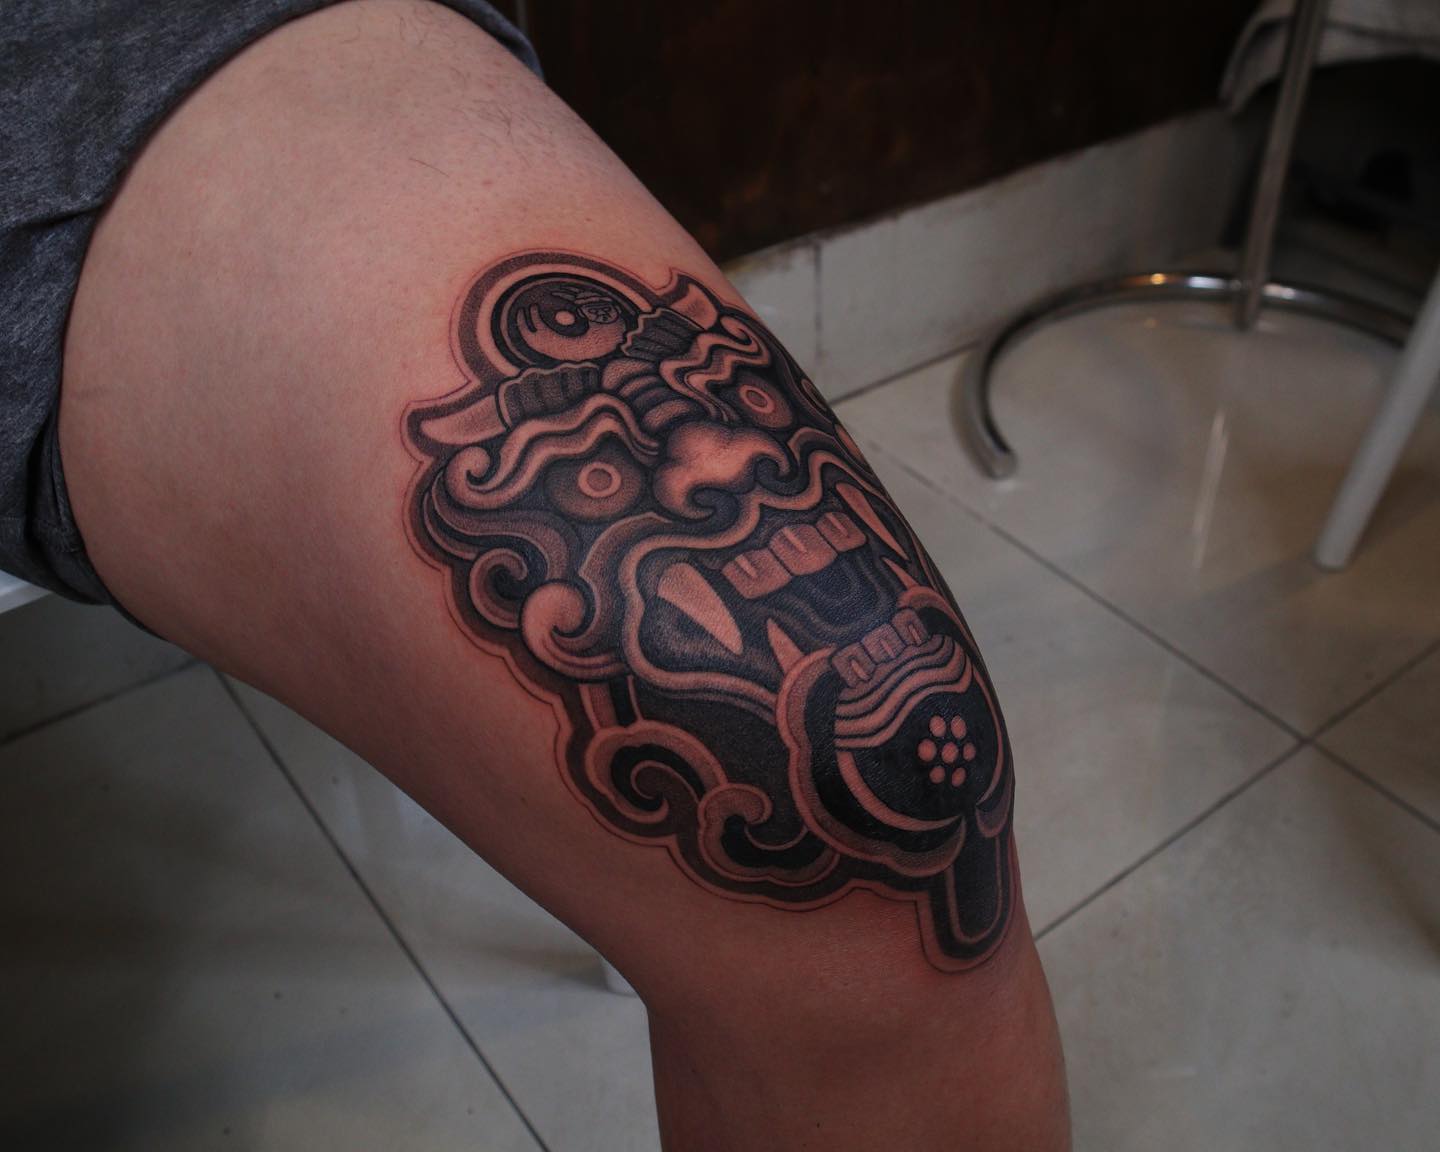 Guys who are gothic and those who have big personal beliefs will enjoy this design. Show that you’re someone who likes to express his spiritualism and stick to this giant knee tattoo. In the end, it is a masterpiece worth getting and exploring.